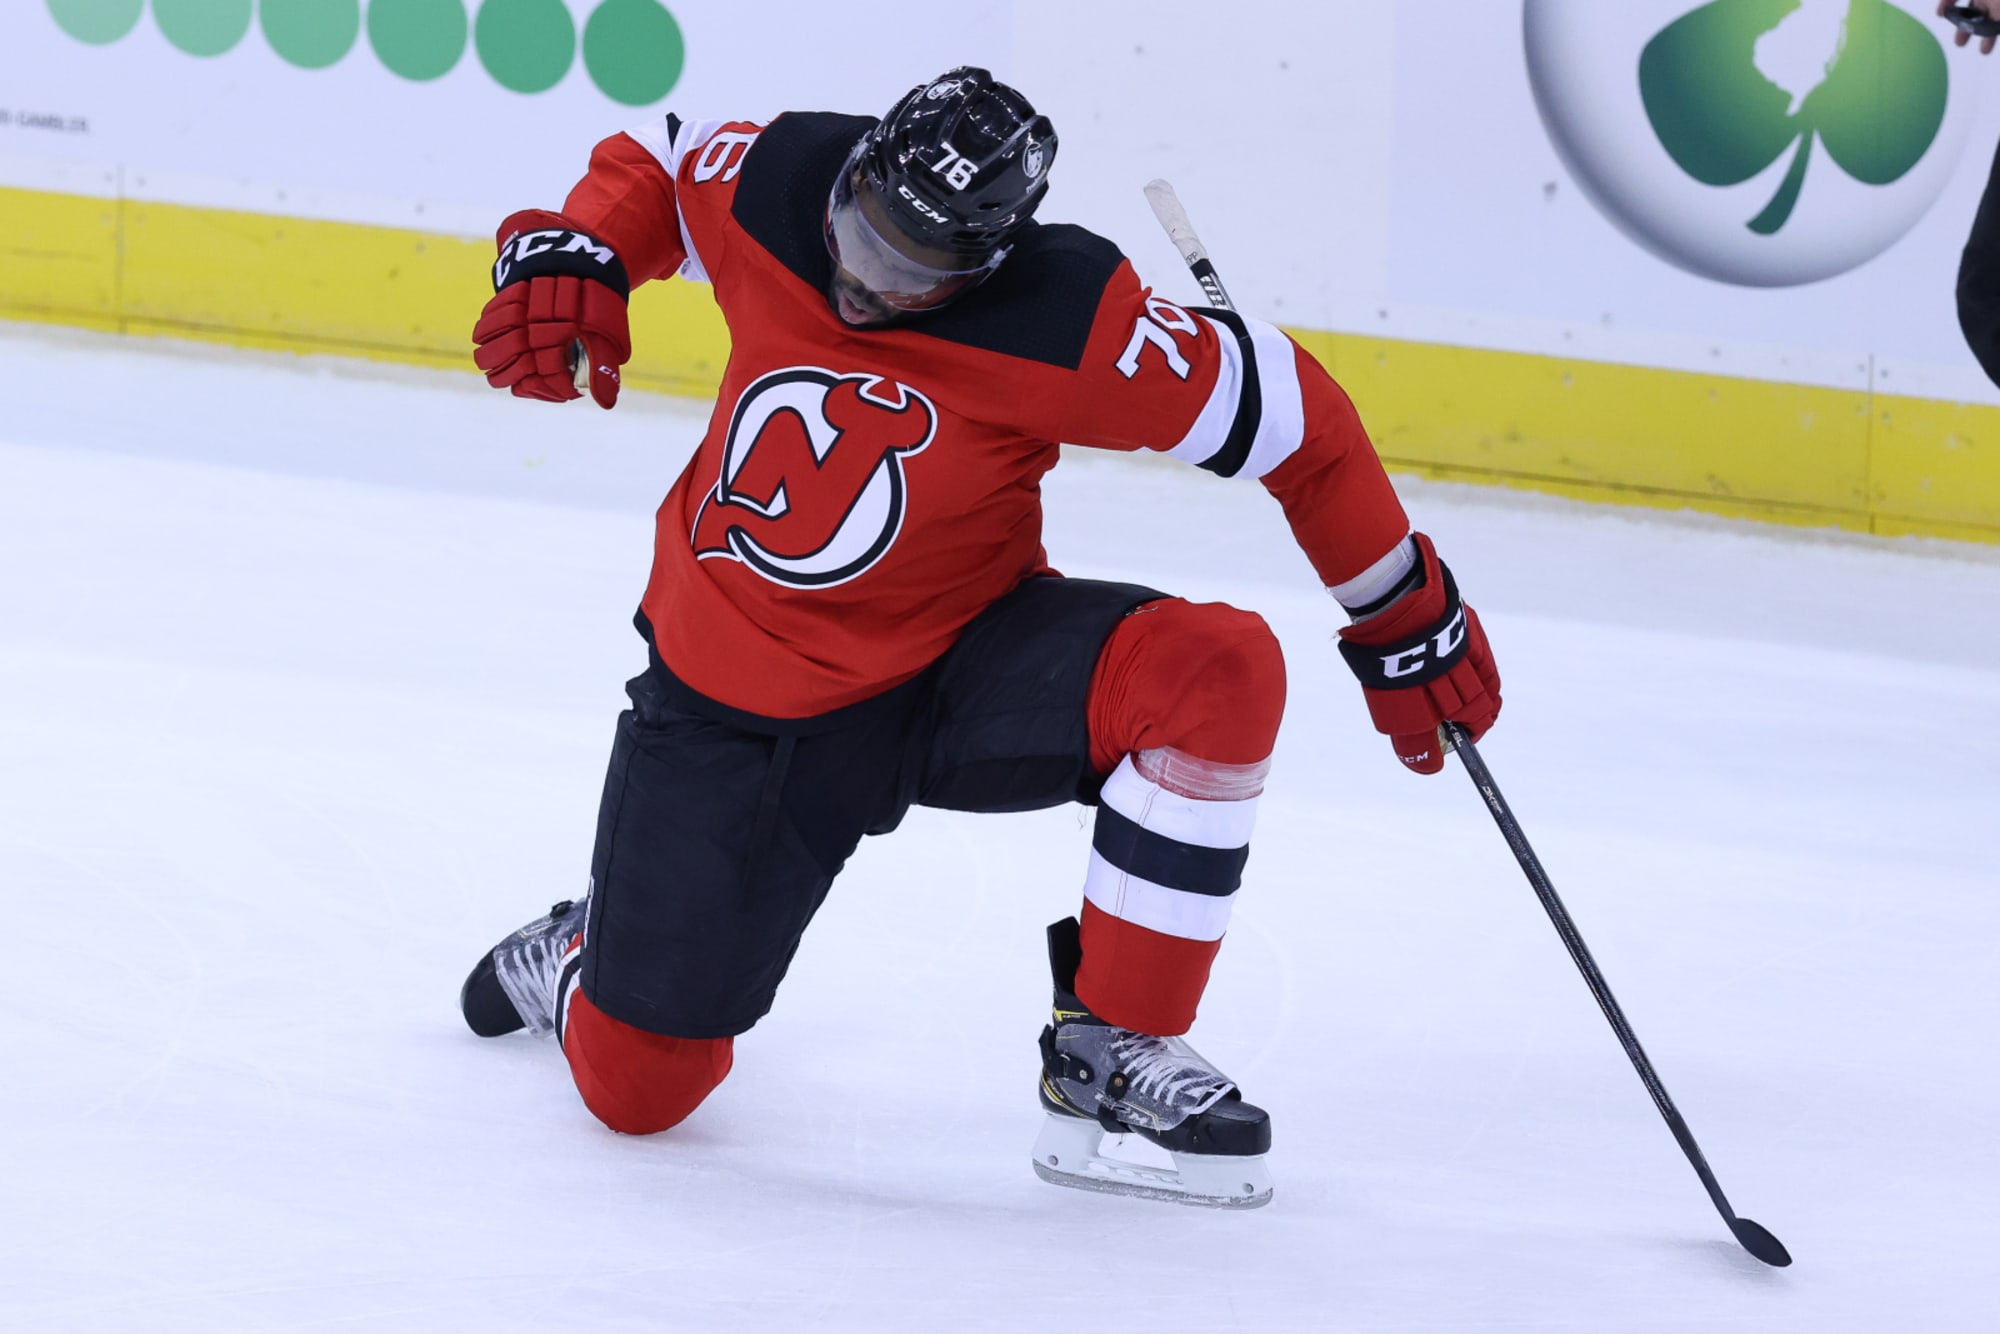 New Jersey Devils defenseman P.K. Subban (76) stands on the ice